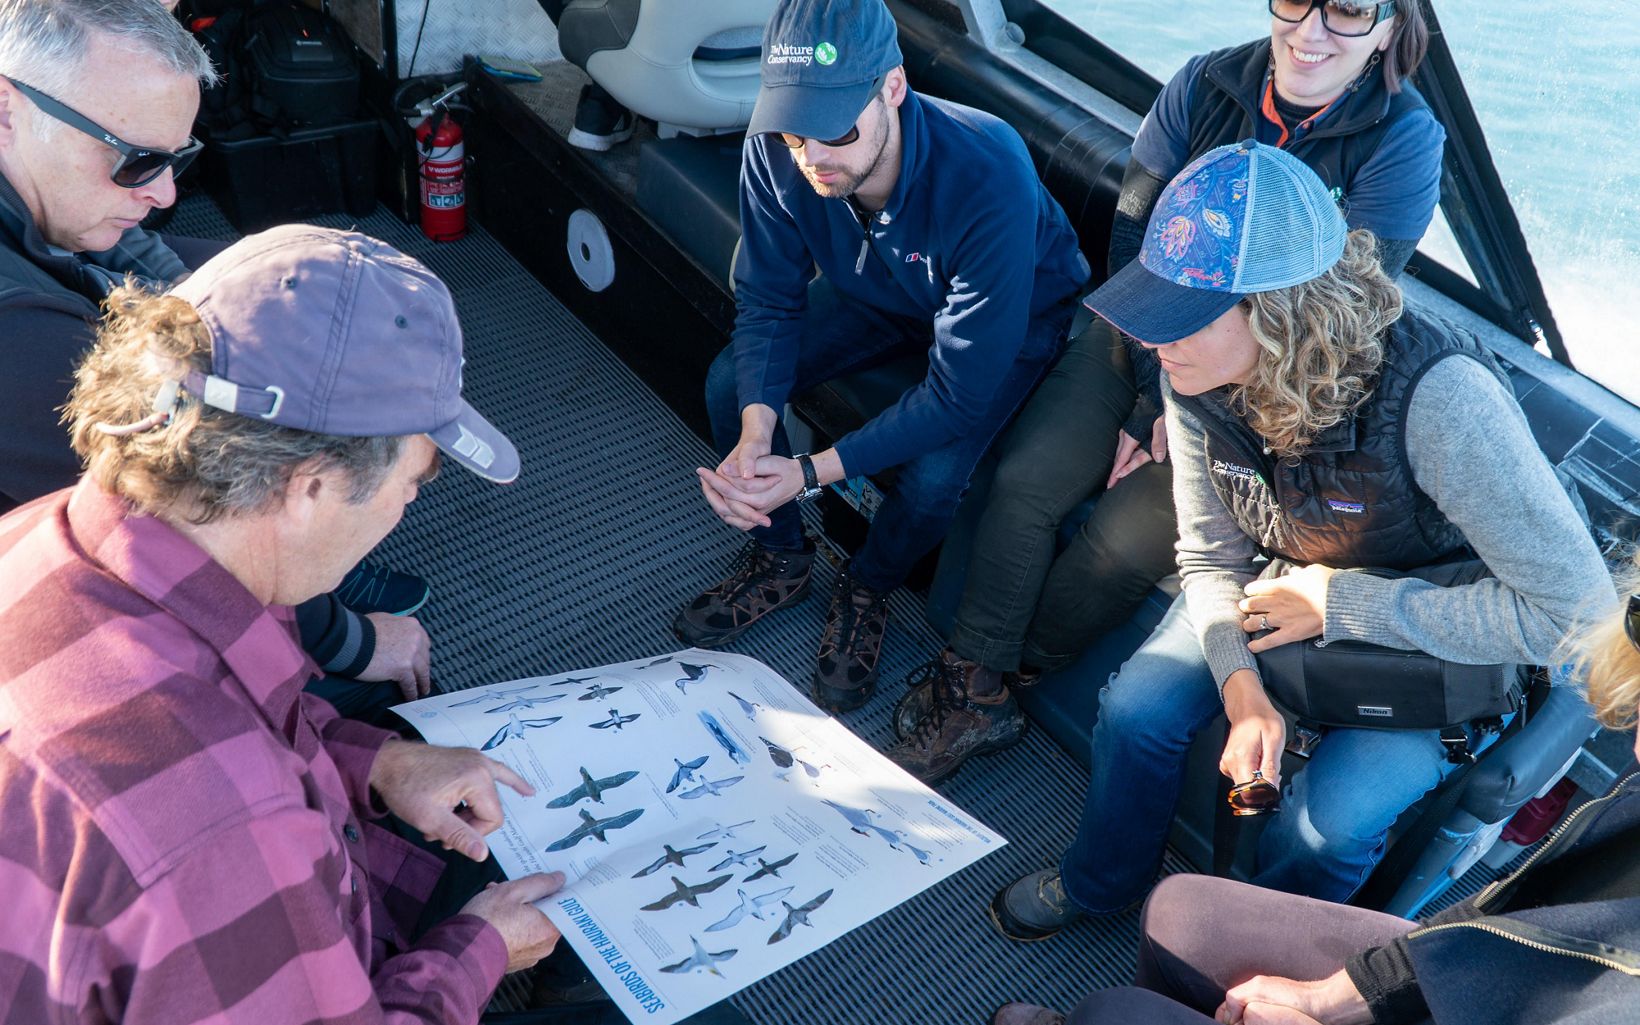 Built on Partnership As a member of the Hauraki Gulf Forum, TNC is working with partners to contribute towards the long-term goal of restoring 1,000 square kilometers of shellfish beds and reefs. © Ethan Kearns/The Nature Conservancy